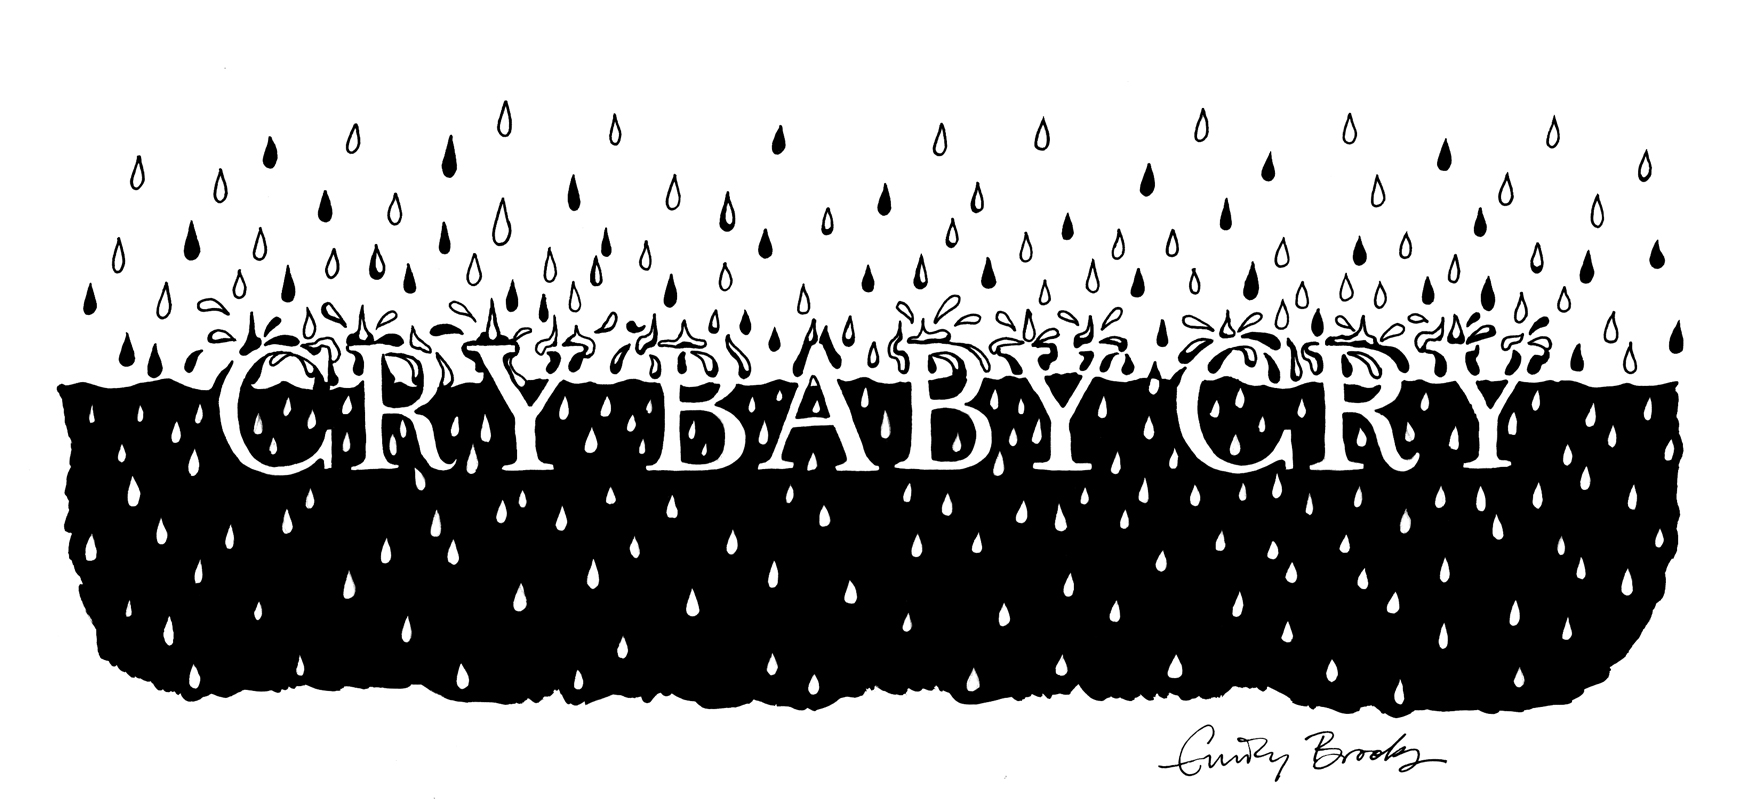 crybaby